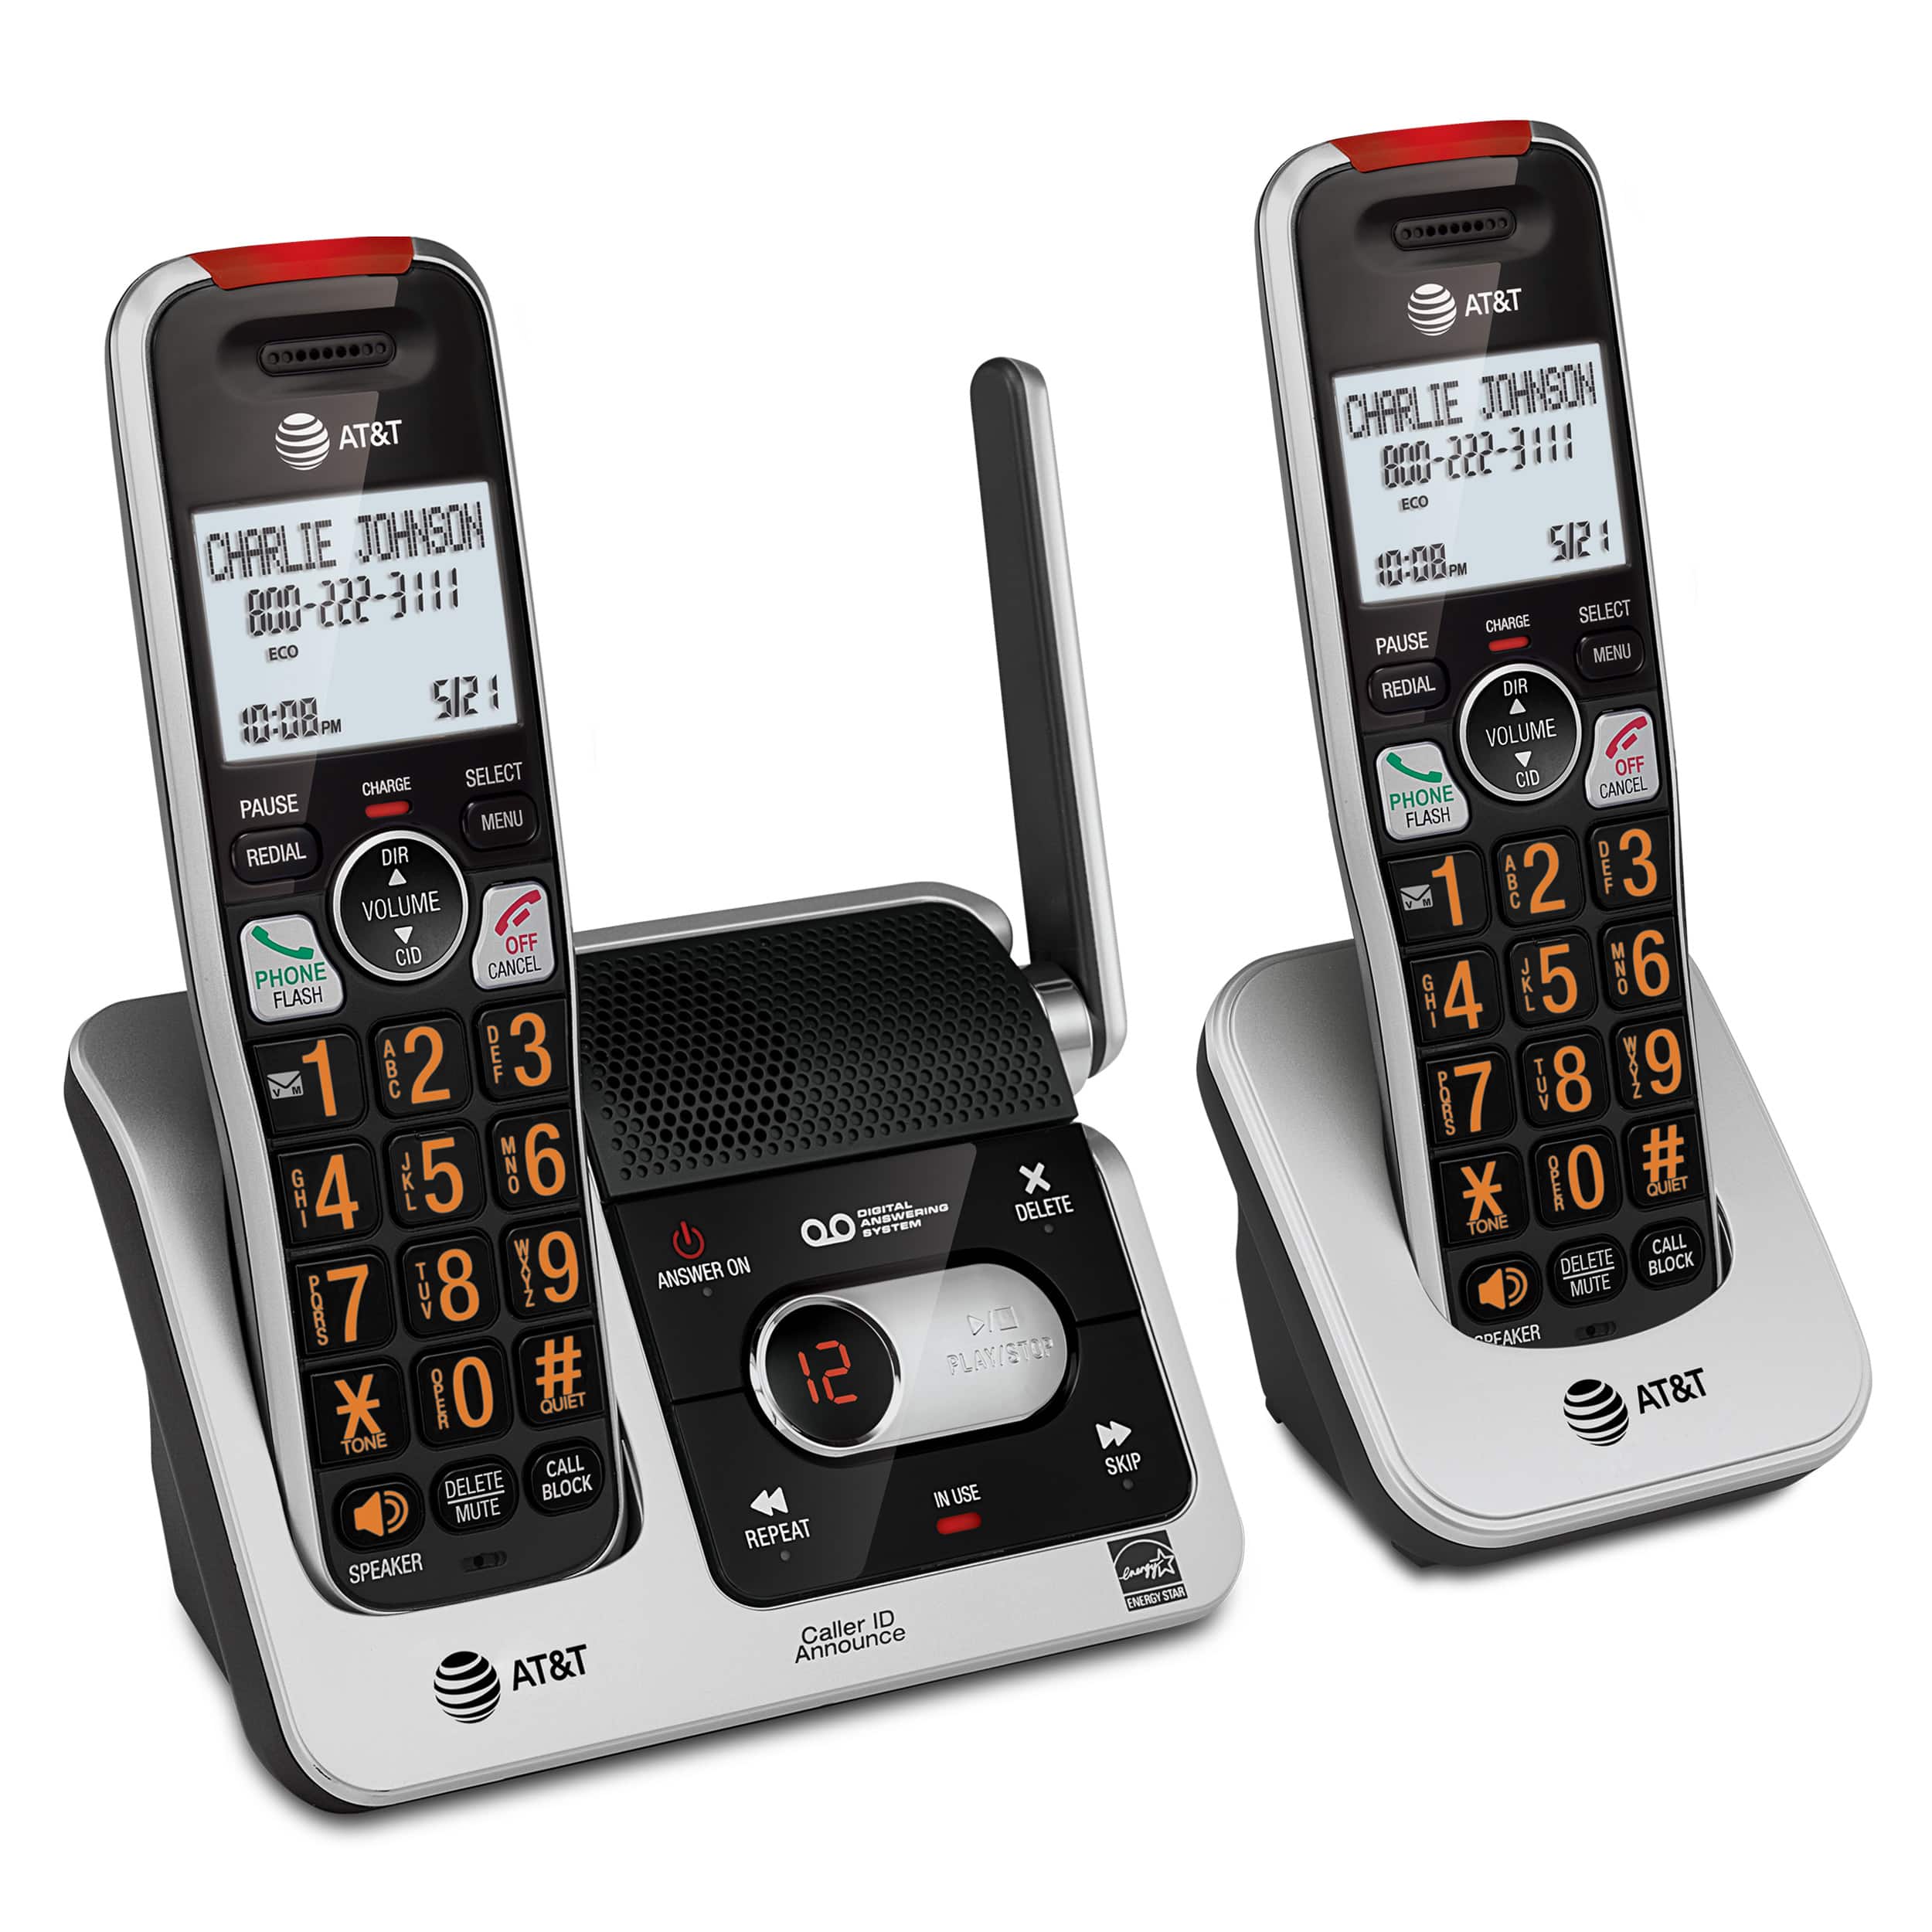 2-Handset Cordless Phone with Unsurpassed Range, Smart Call Blocker and Answering System - view 9